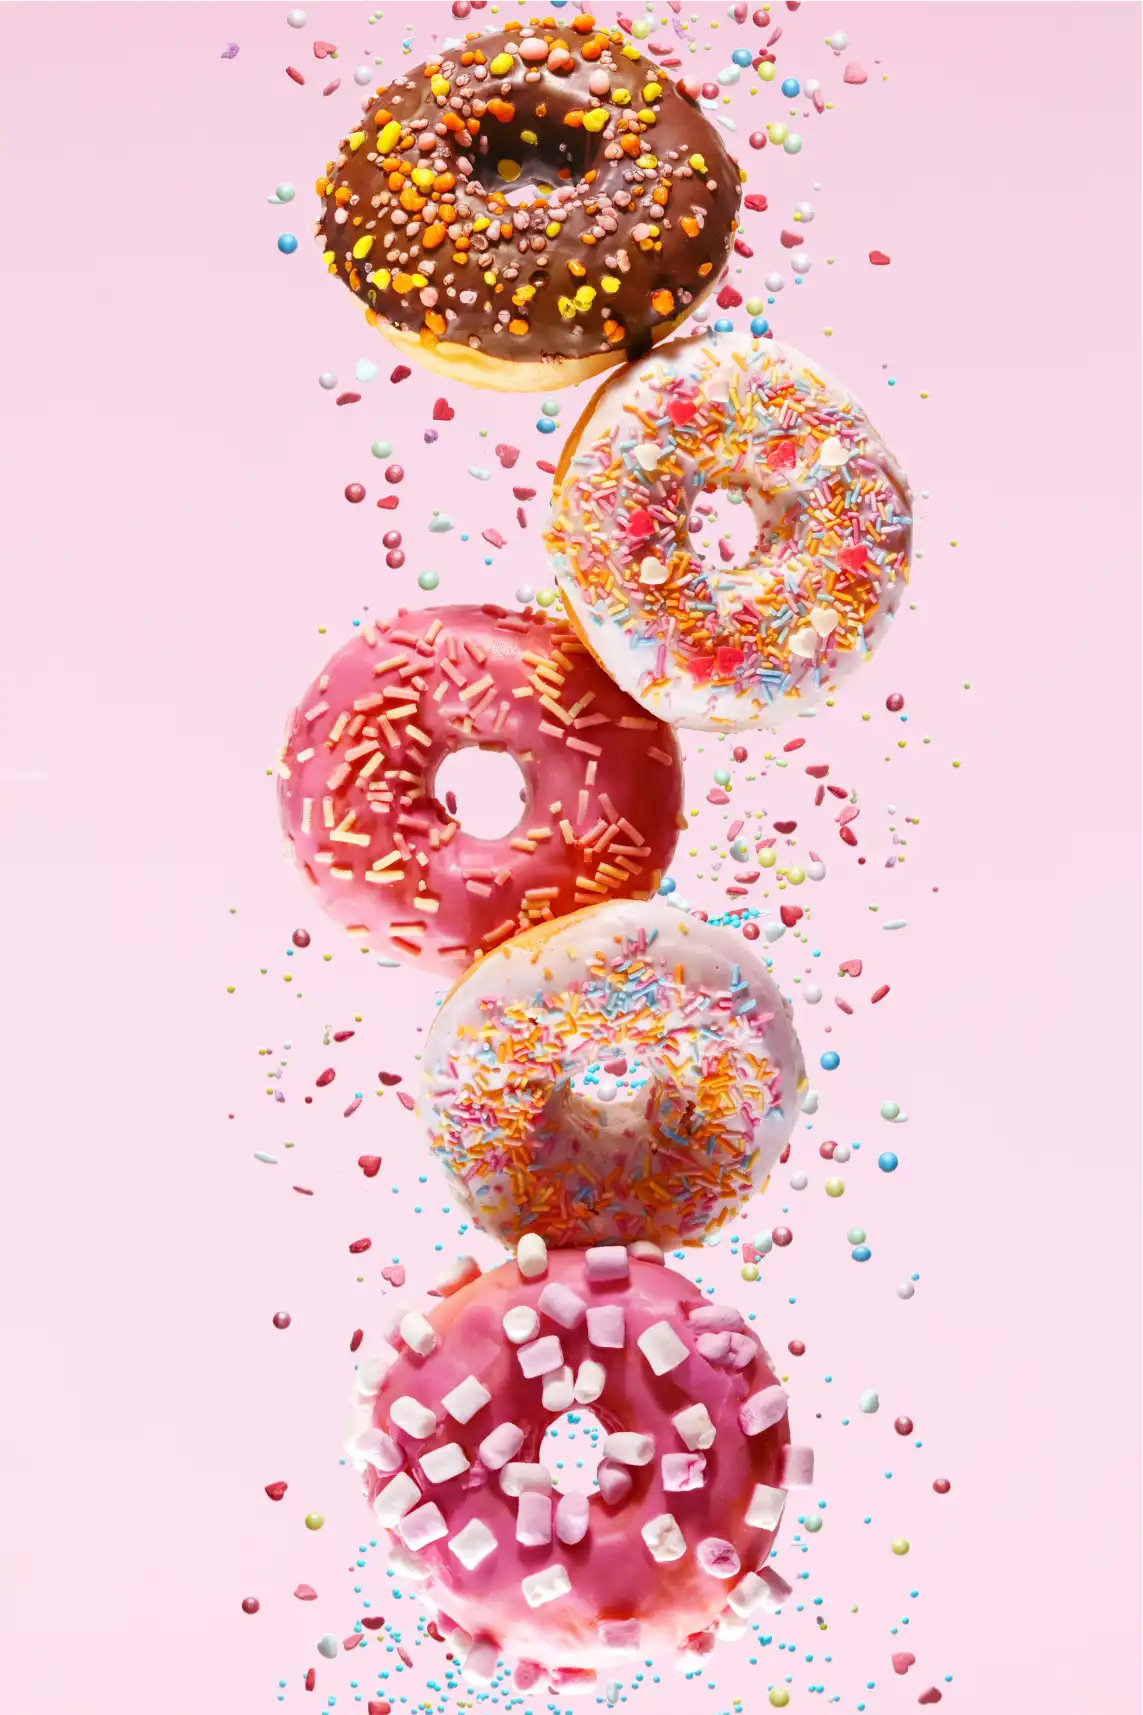 Donuts - mauvaise alimentation